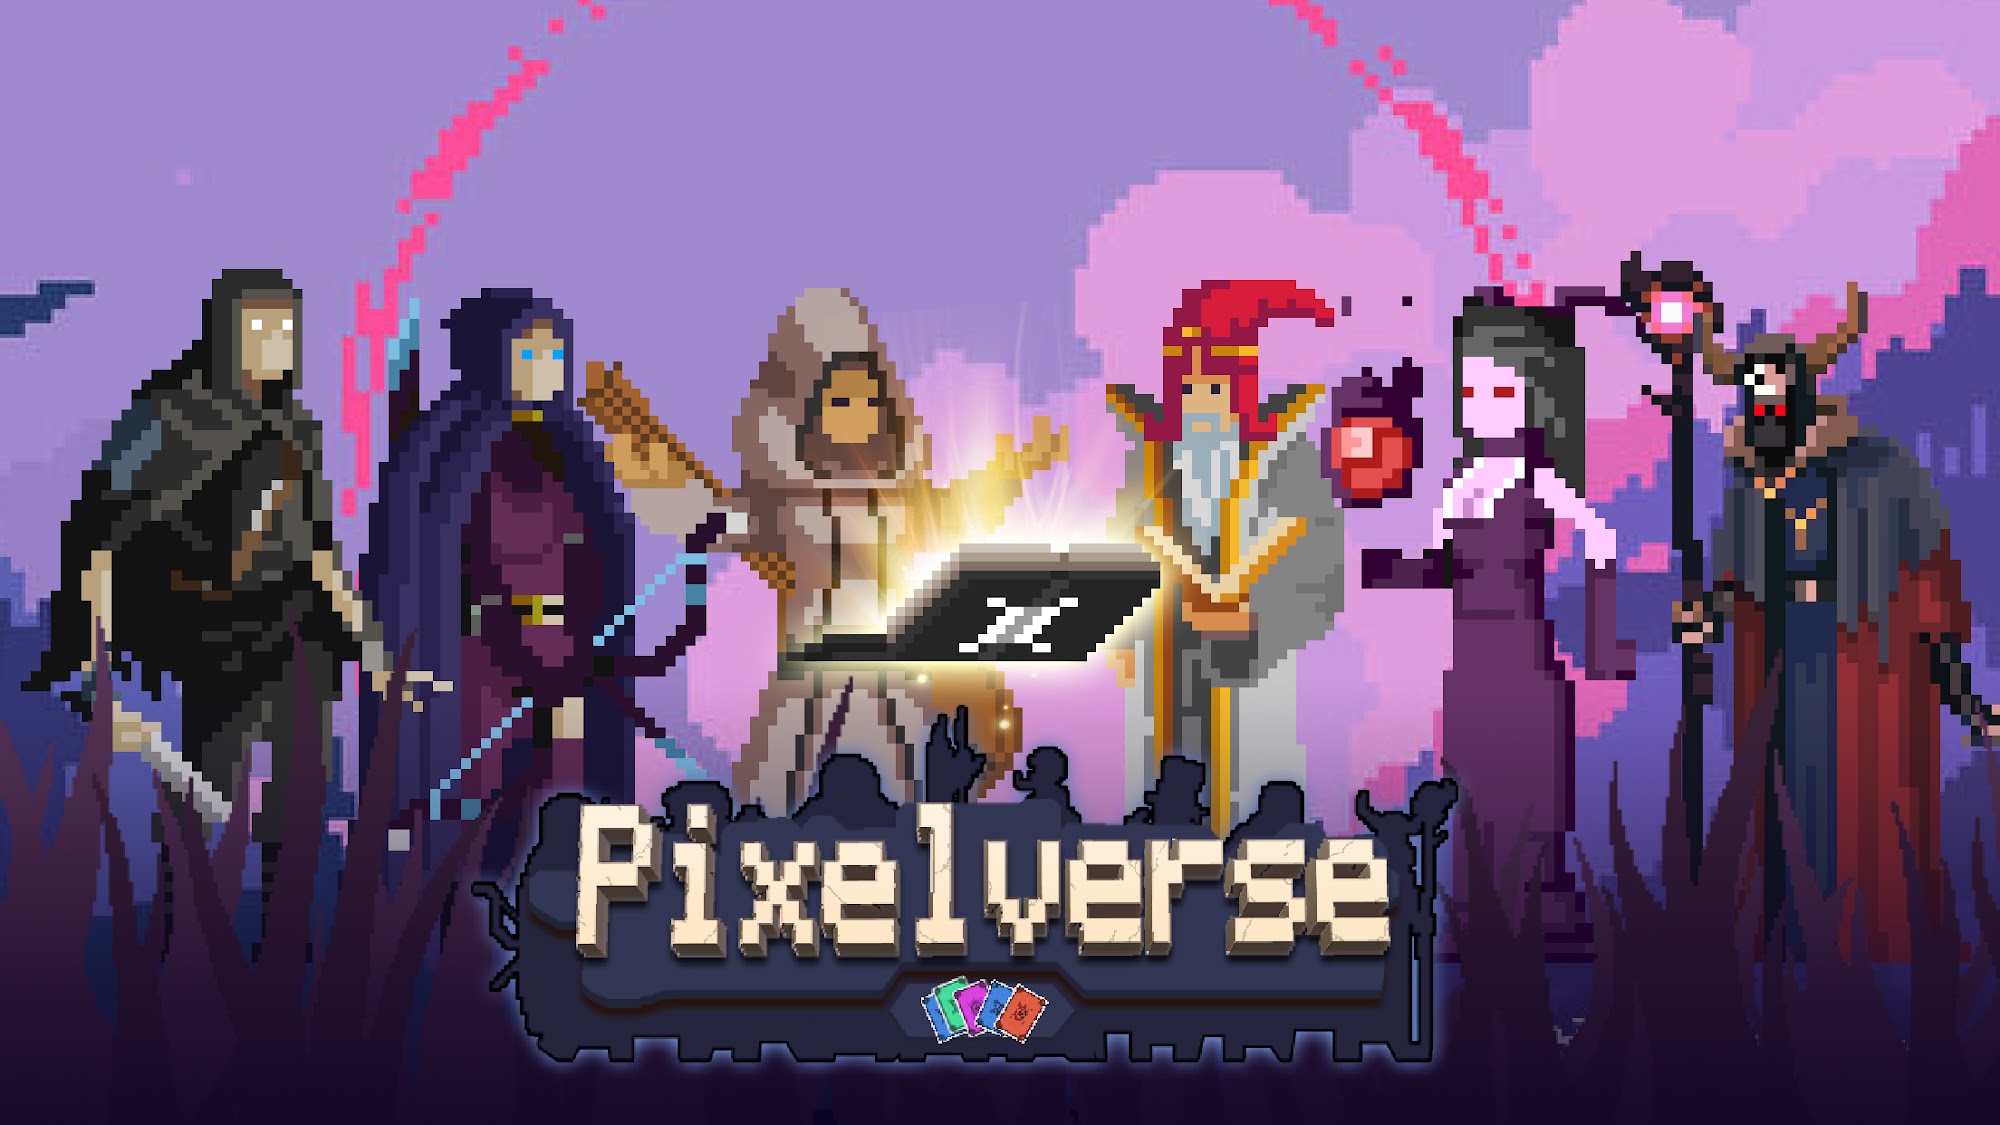 Download Pixelverse - Deck Heroes Android free game.